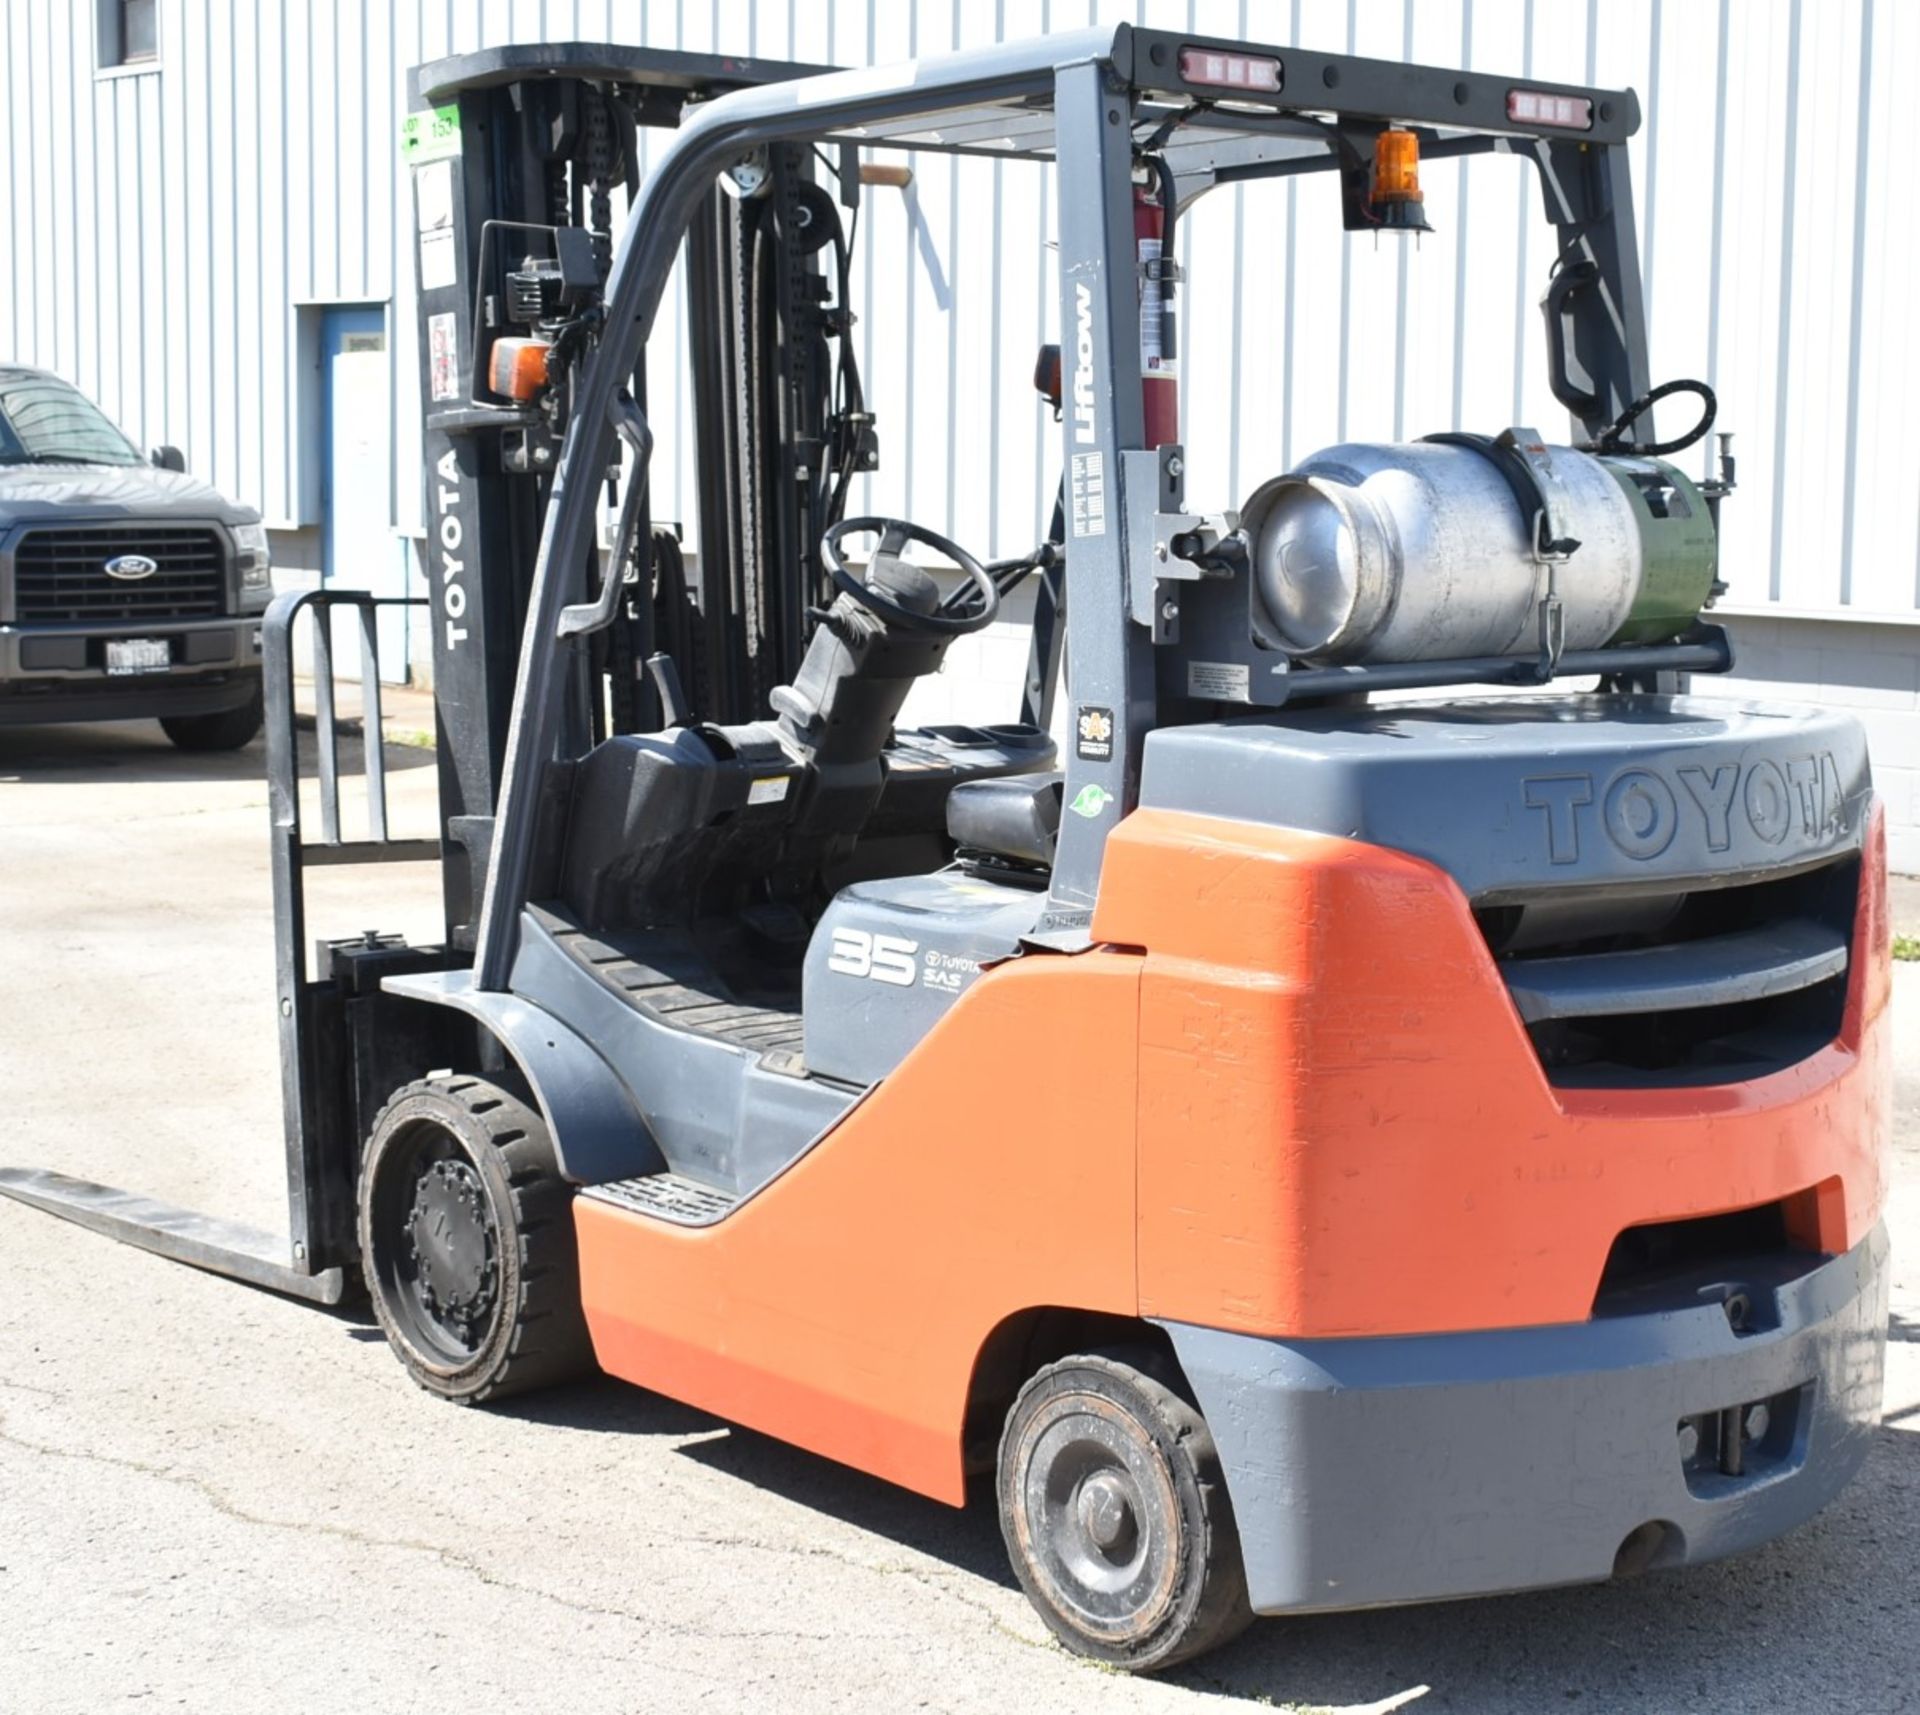 TOYOTA (2018) GC35U LPG FORKLIFT WITH 7250 LBS MAX CAPACITY, 187" 3-STAGE HIGH VISIBILITY MAST, - Image 2 of 8